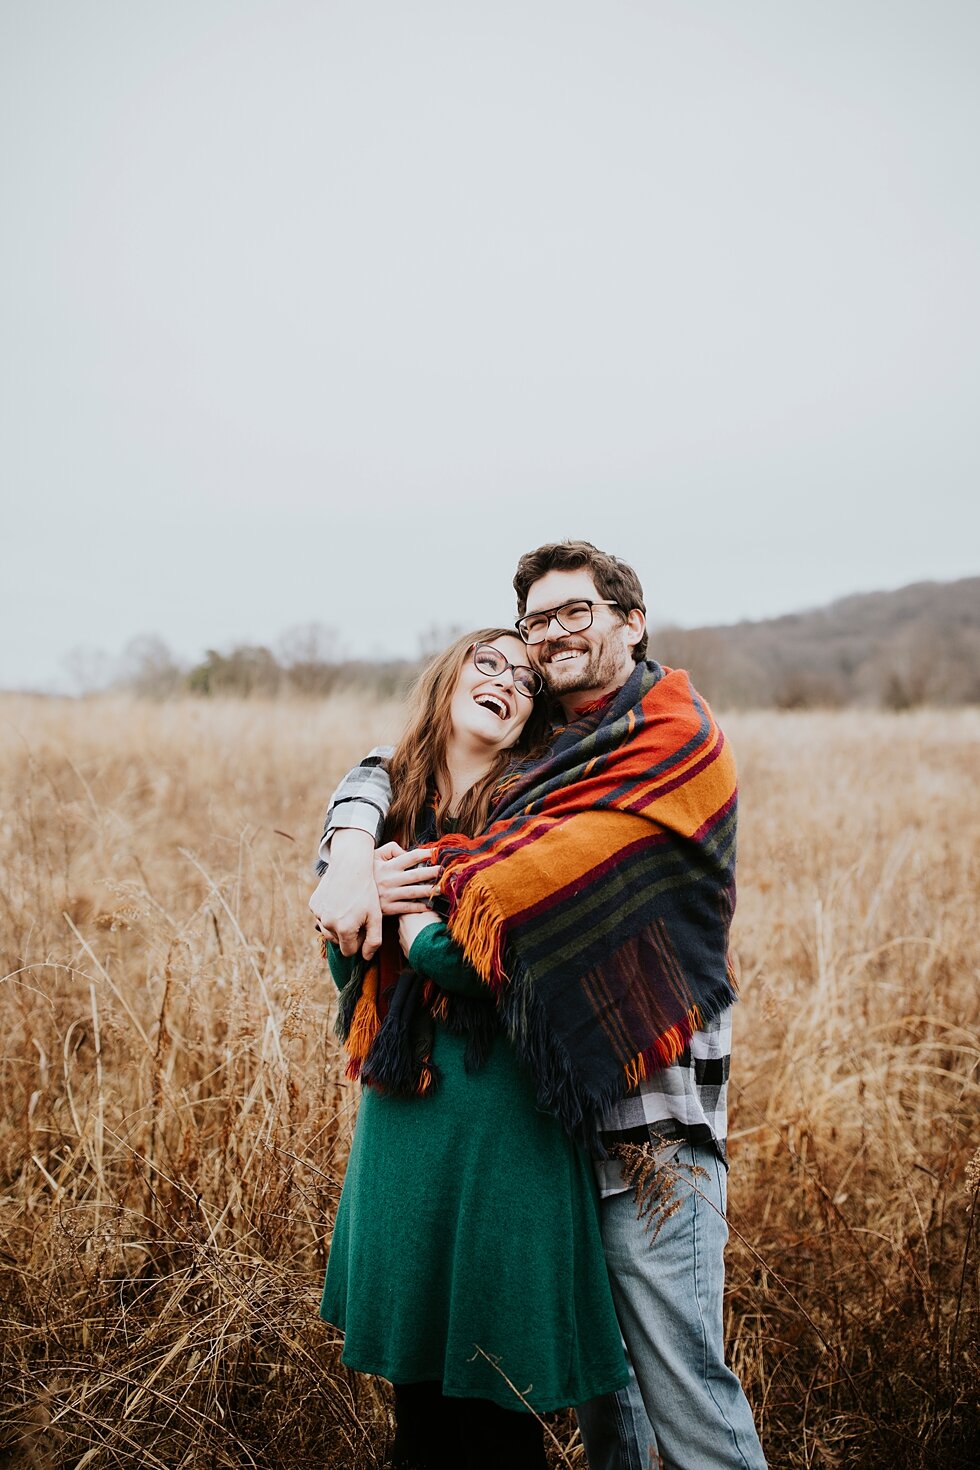  Engaged couple laughing under a warm orange and red blanket on a rainy winter day in Kentucky. Louisville photographer winter engagement Bernheim Forest emerald green dress plaid shirt rainy day Kentucky couple outdoor engagement  #savethedates #eng